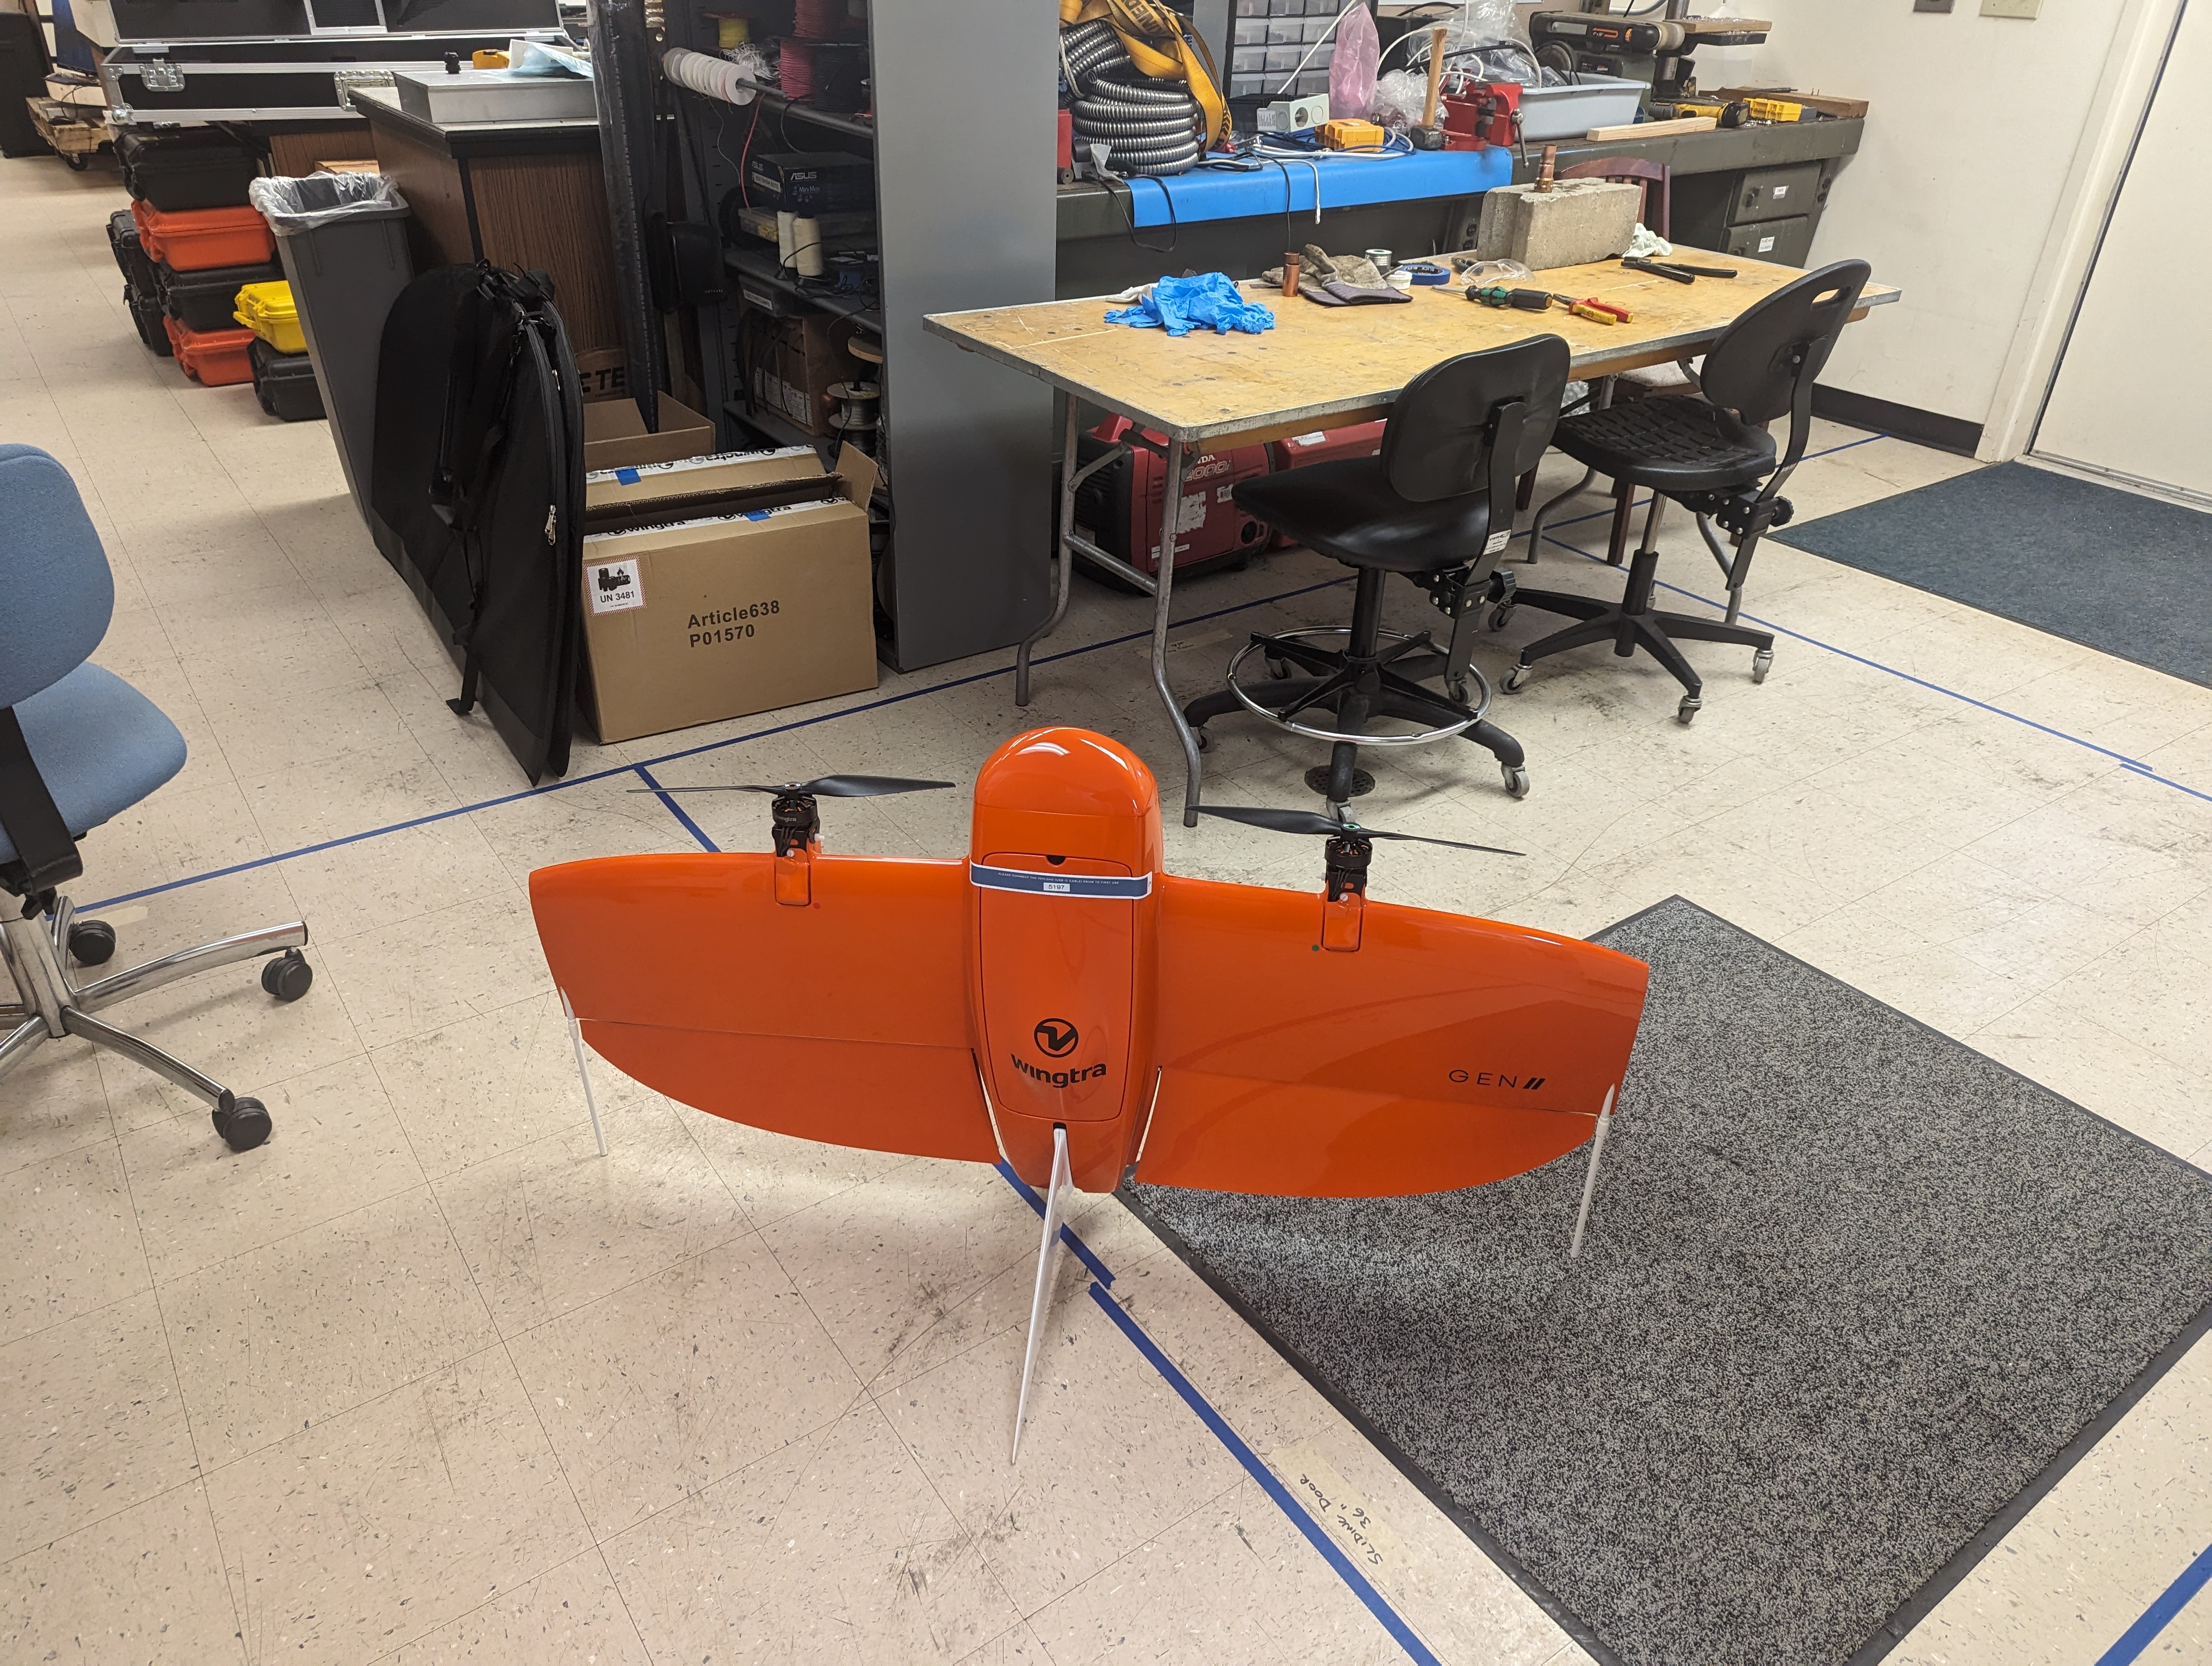 Wingtra UAS assembled in the lab